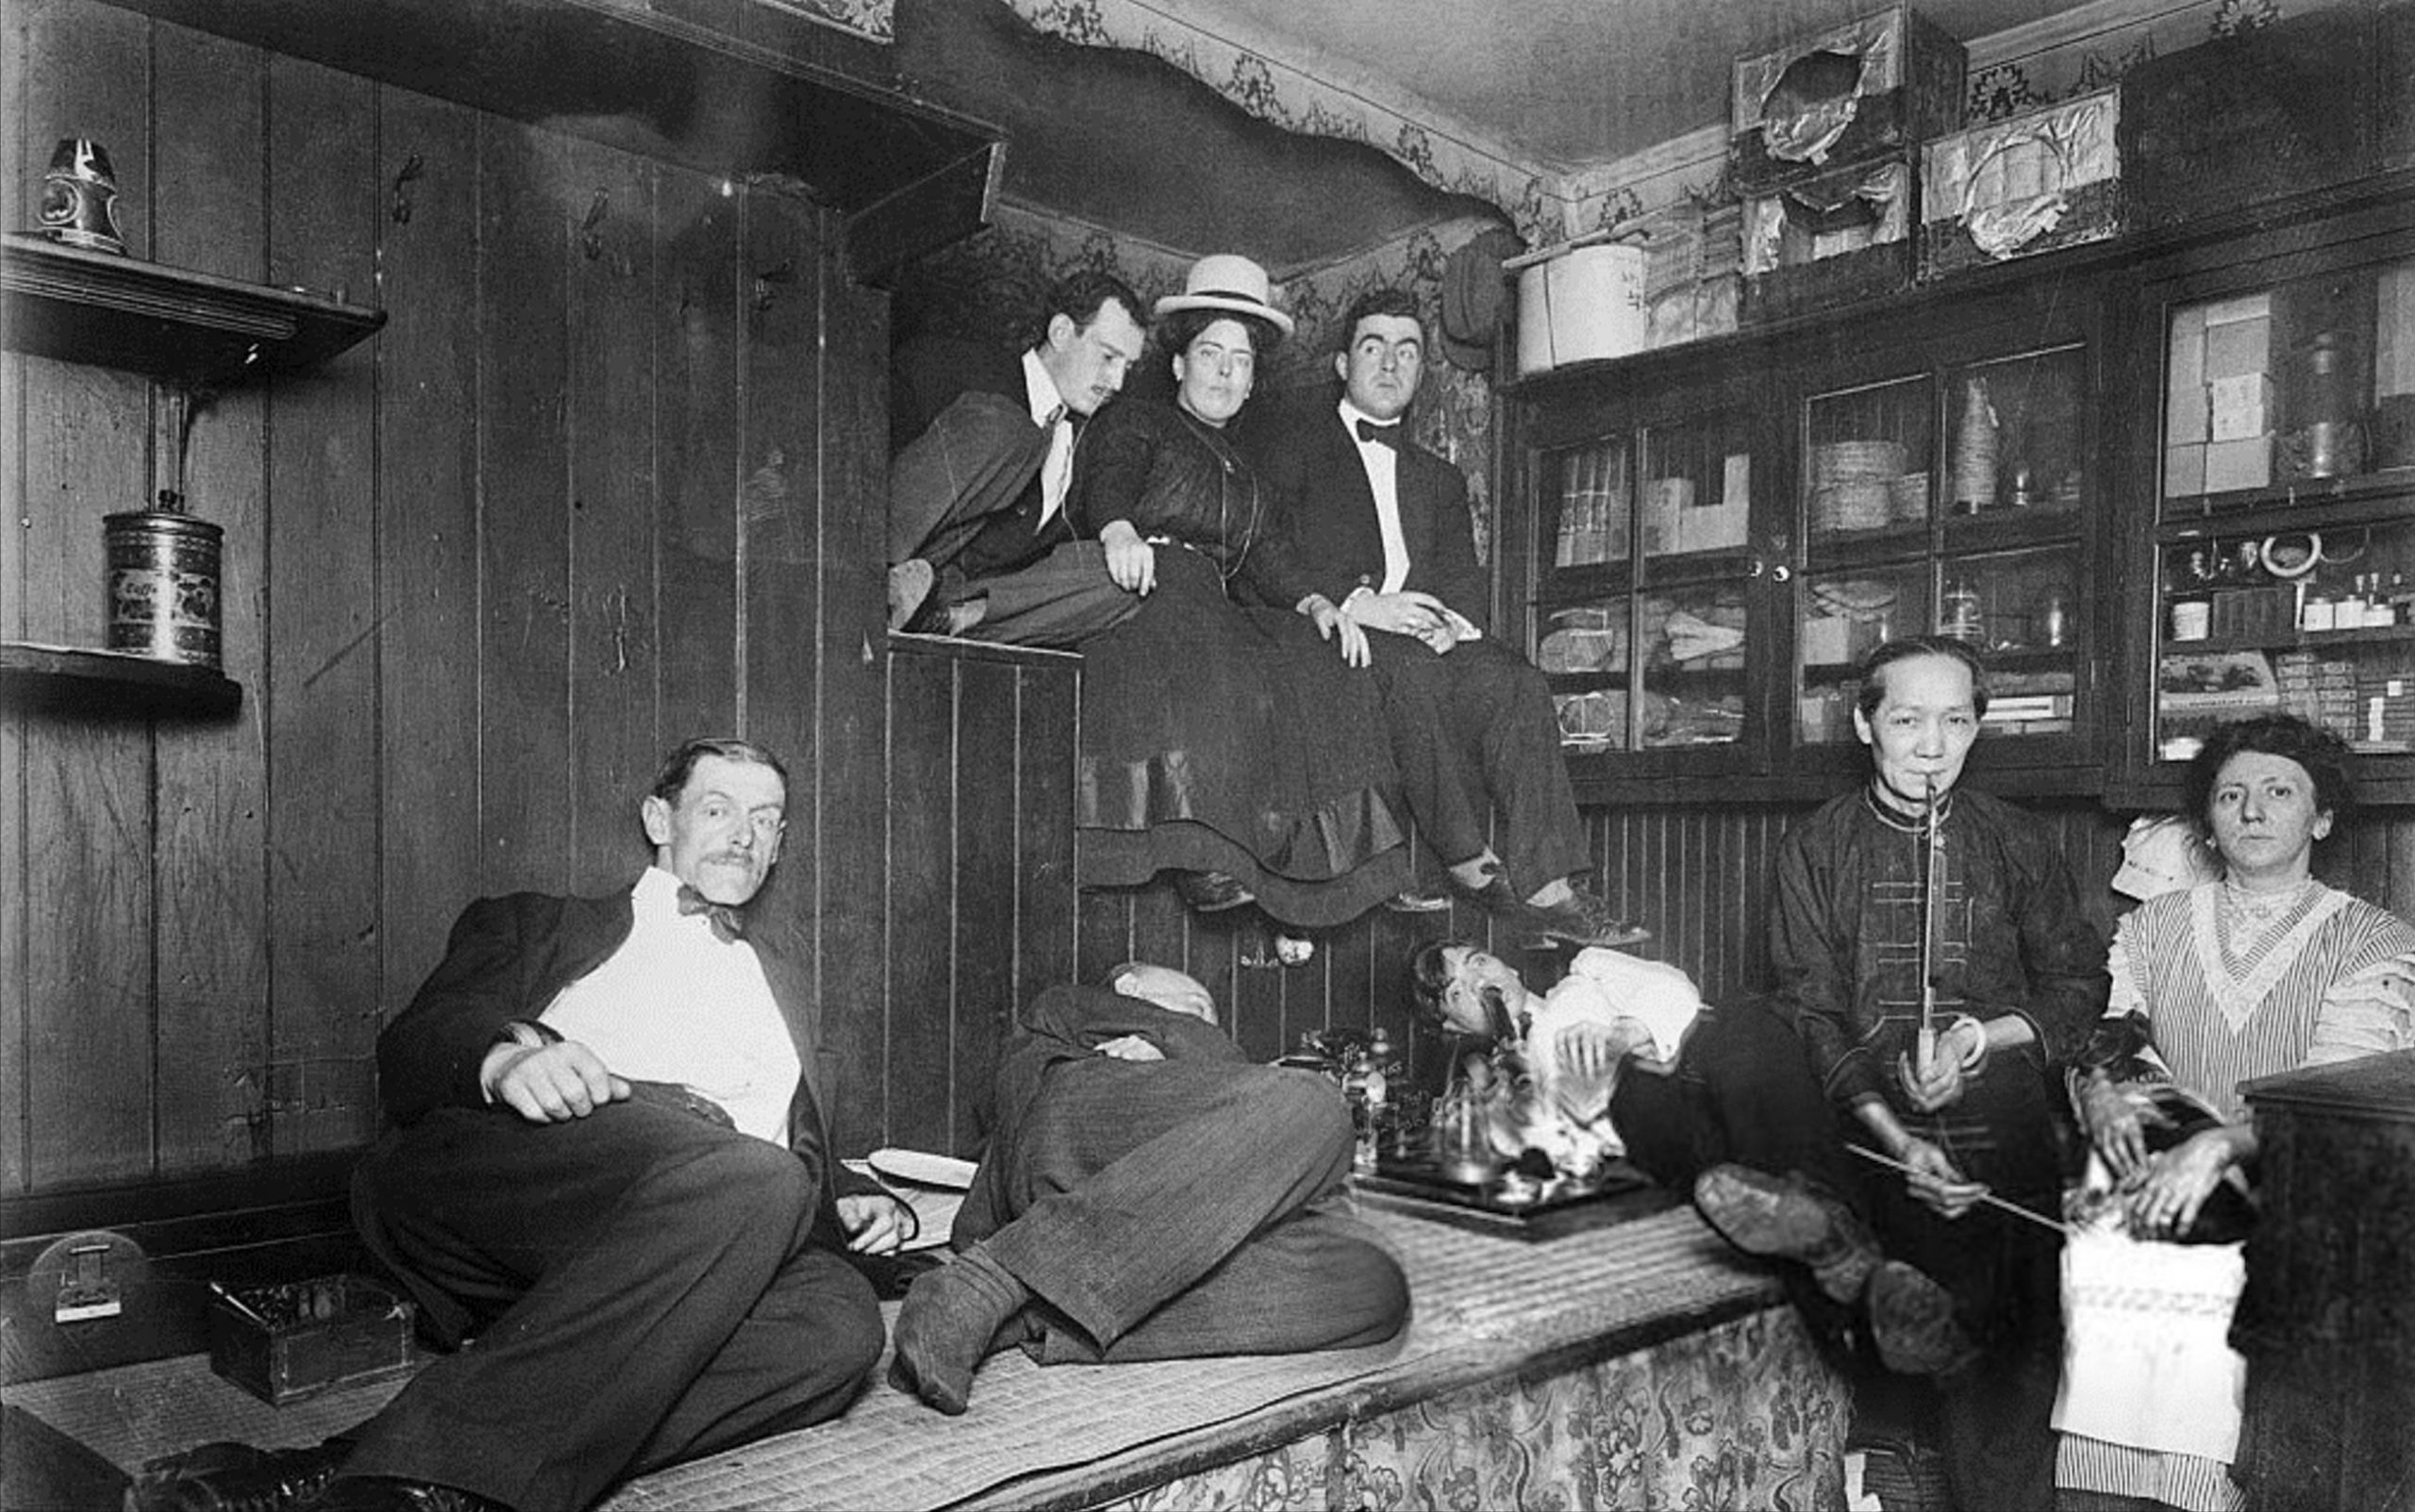 Opium Dens in the West During the heyday of the Old West drugs were pretty common and legal.